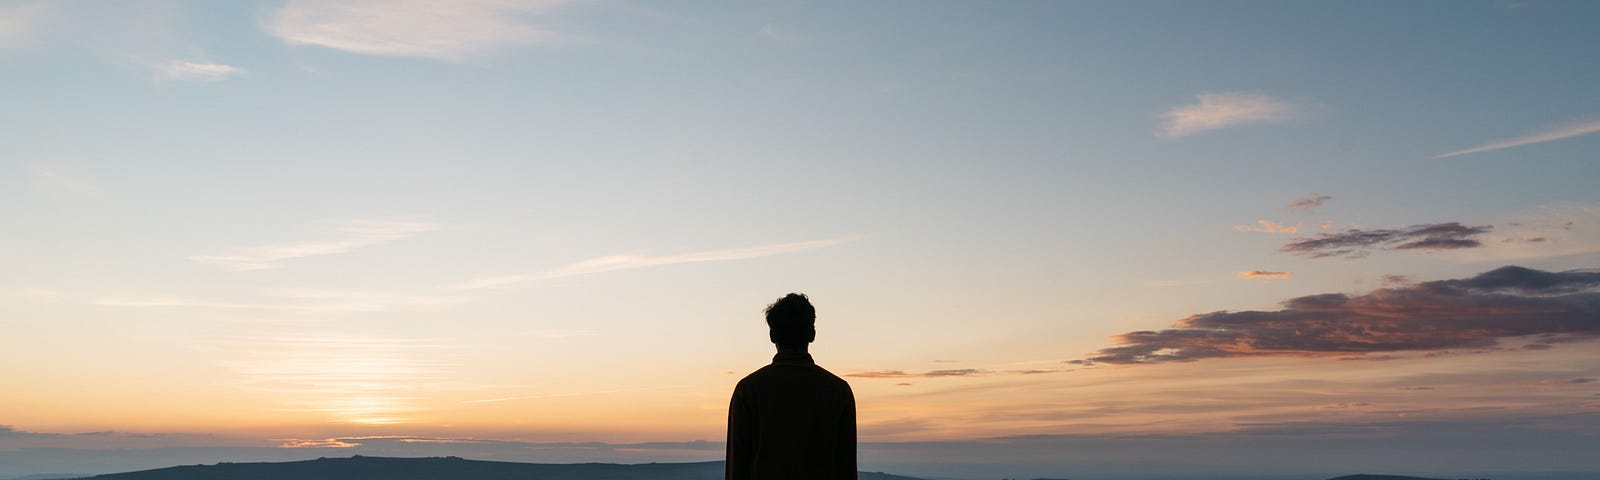 Young man standing and looking at sunset over a horizon